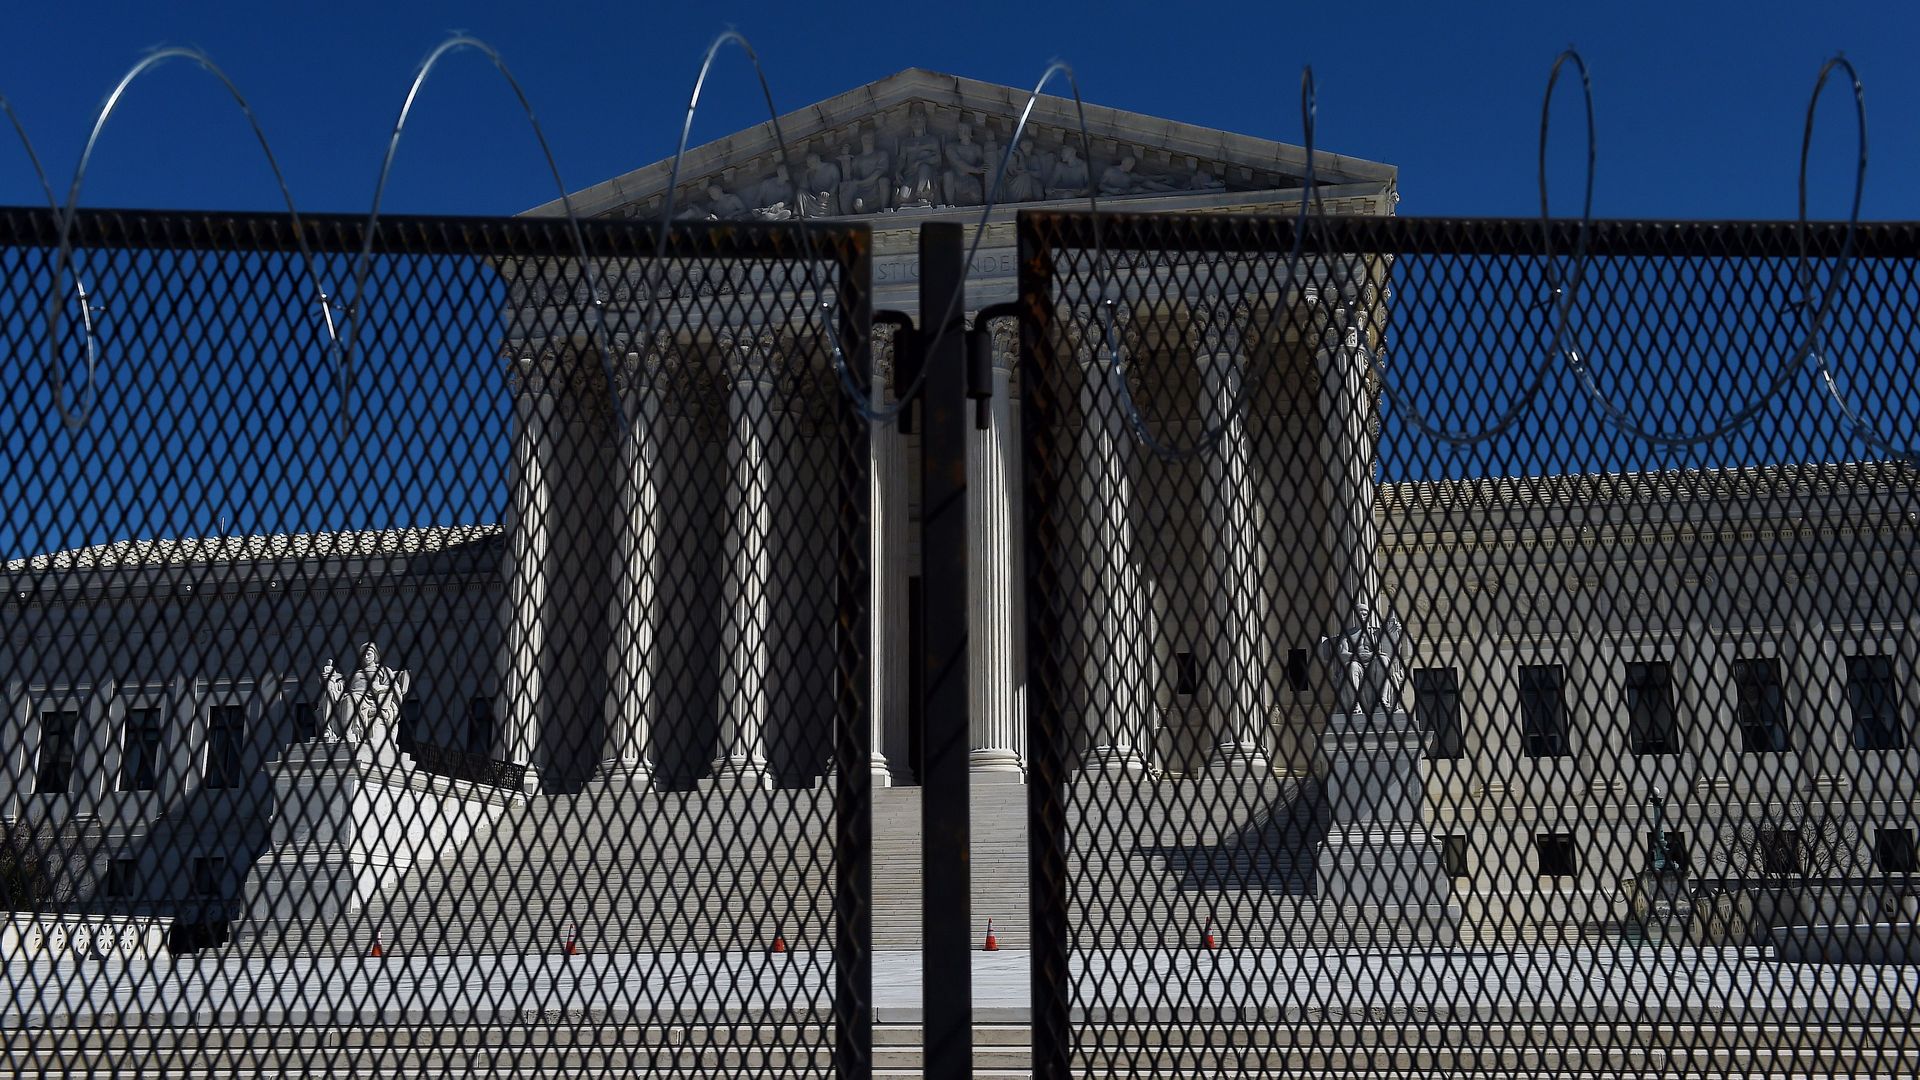 Supreme Court is seen through a fence topped with barbed wire 